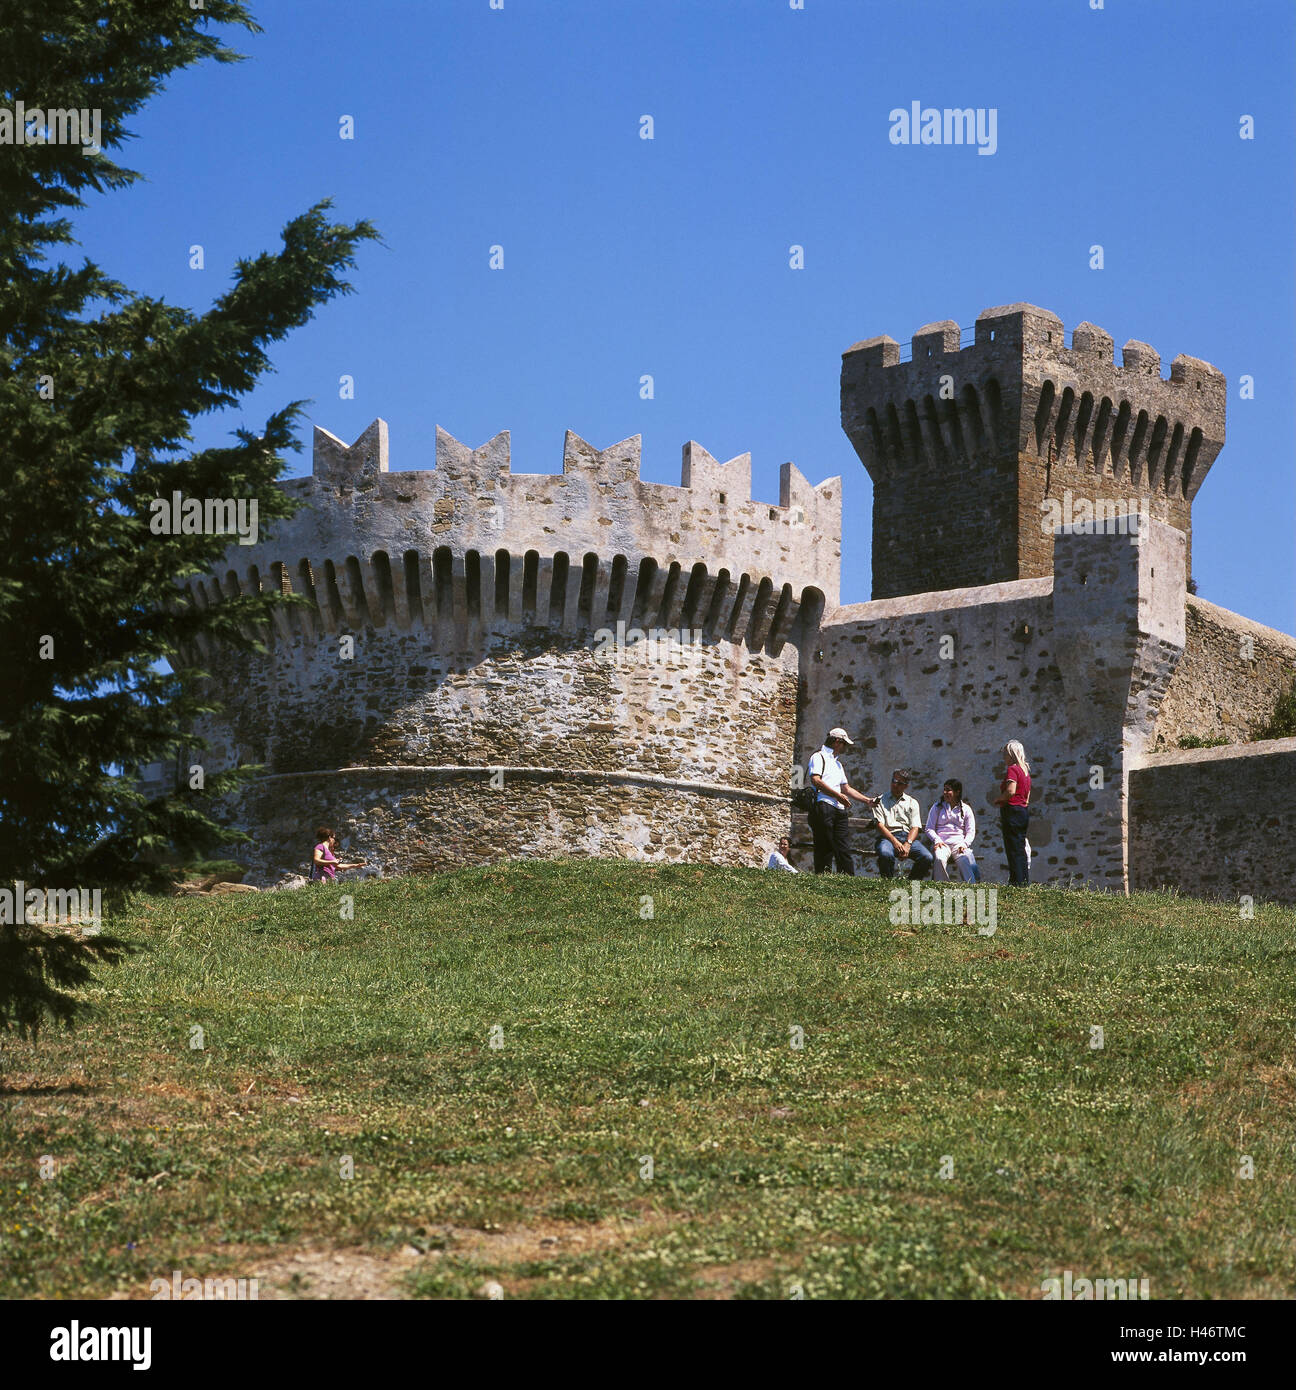 Italy, Tuscany, Populonia, fortress, detail, tourist, Piombino, place of interest, building, structure, architecture, defensive walls, fortress defensive walls, tower, person, tourism, visitor, outside, summer, Stock Photo